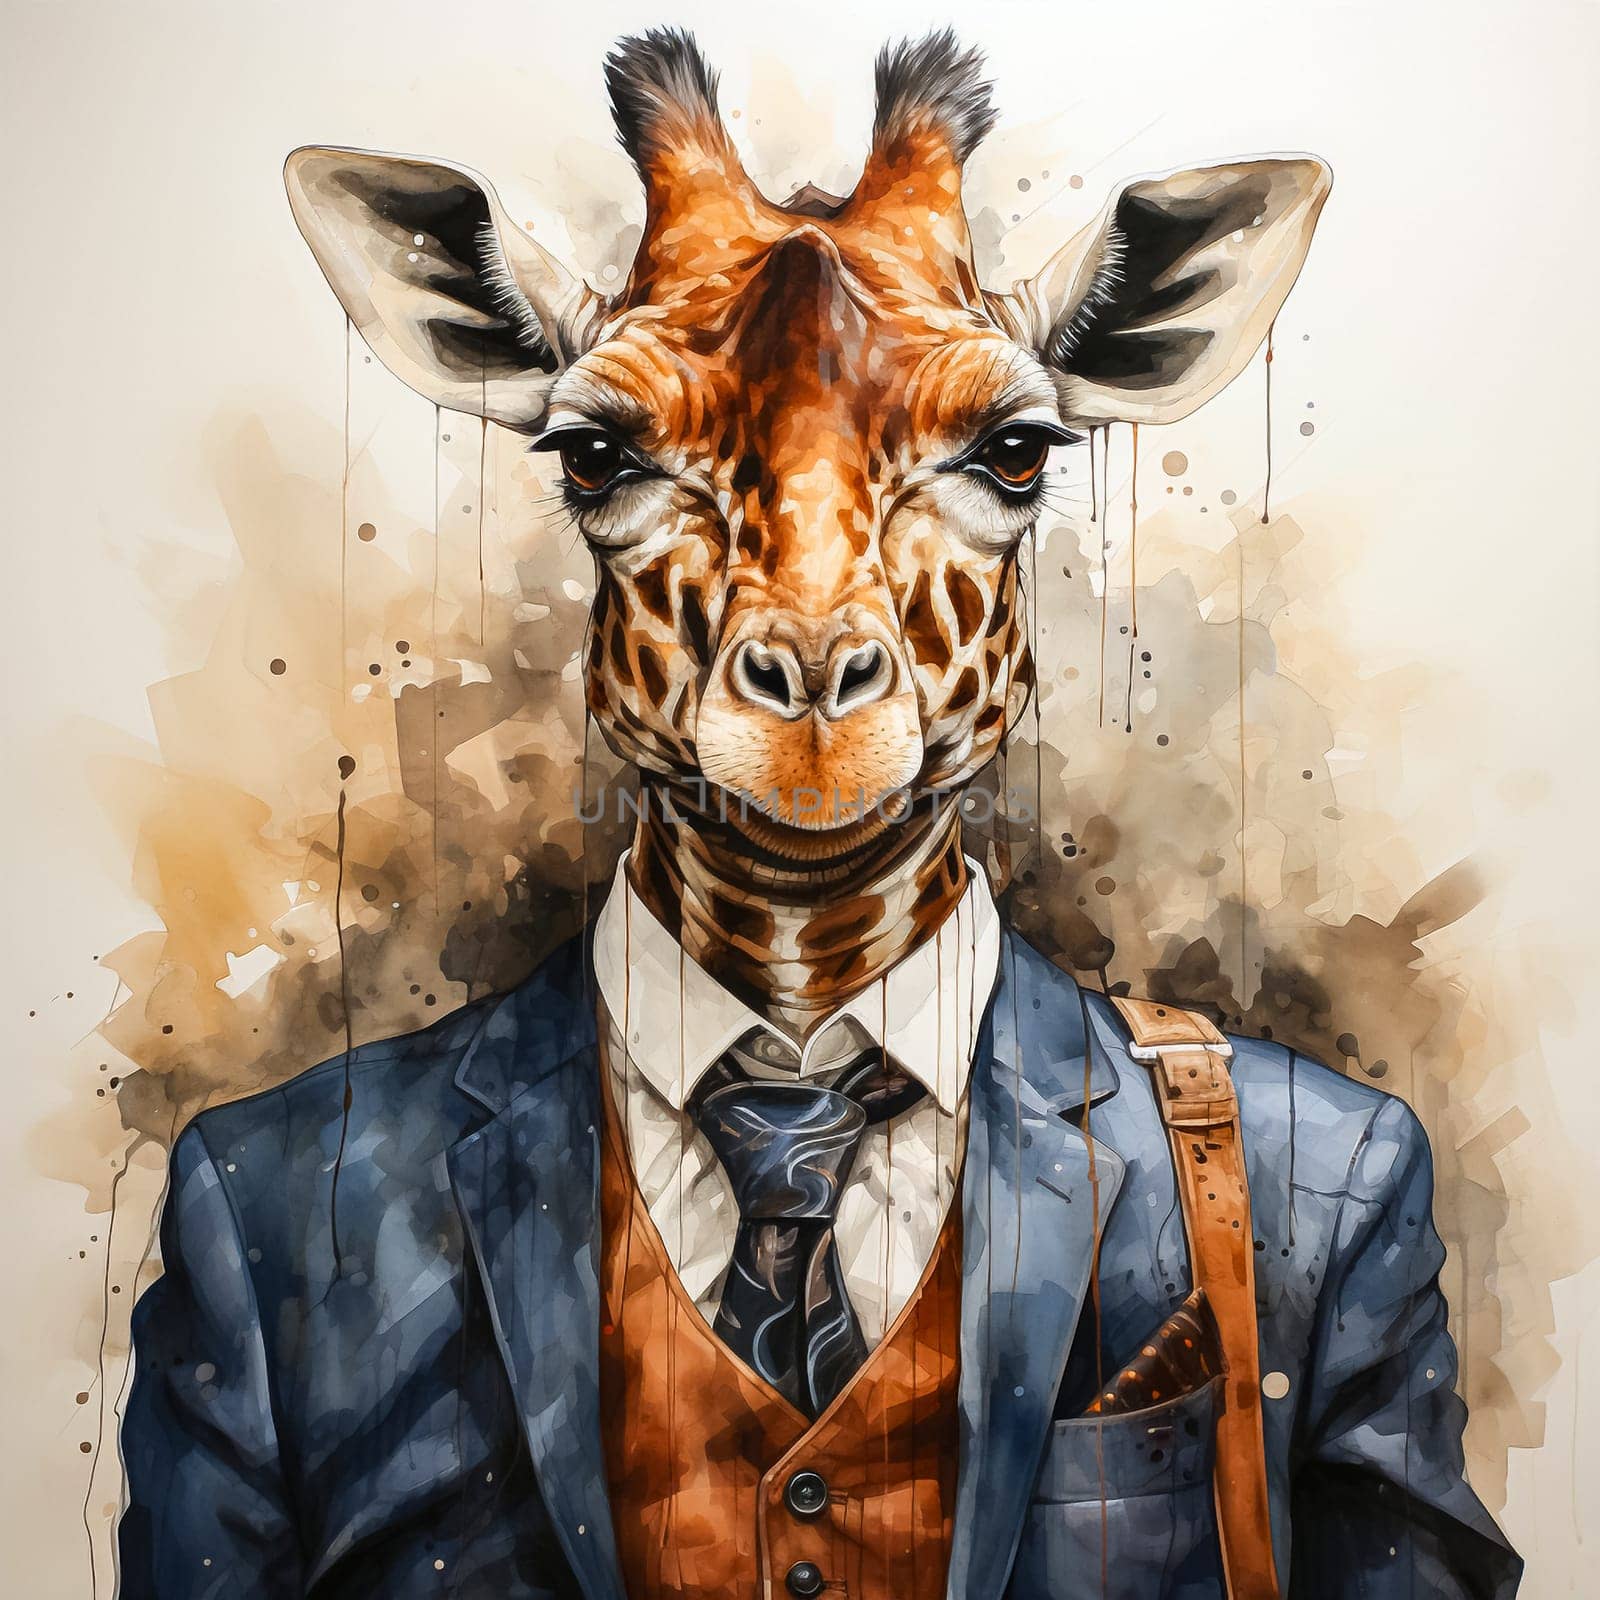 A watercolor drawing of a giraffe in a formal suit by Alla_Morozova93